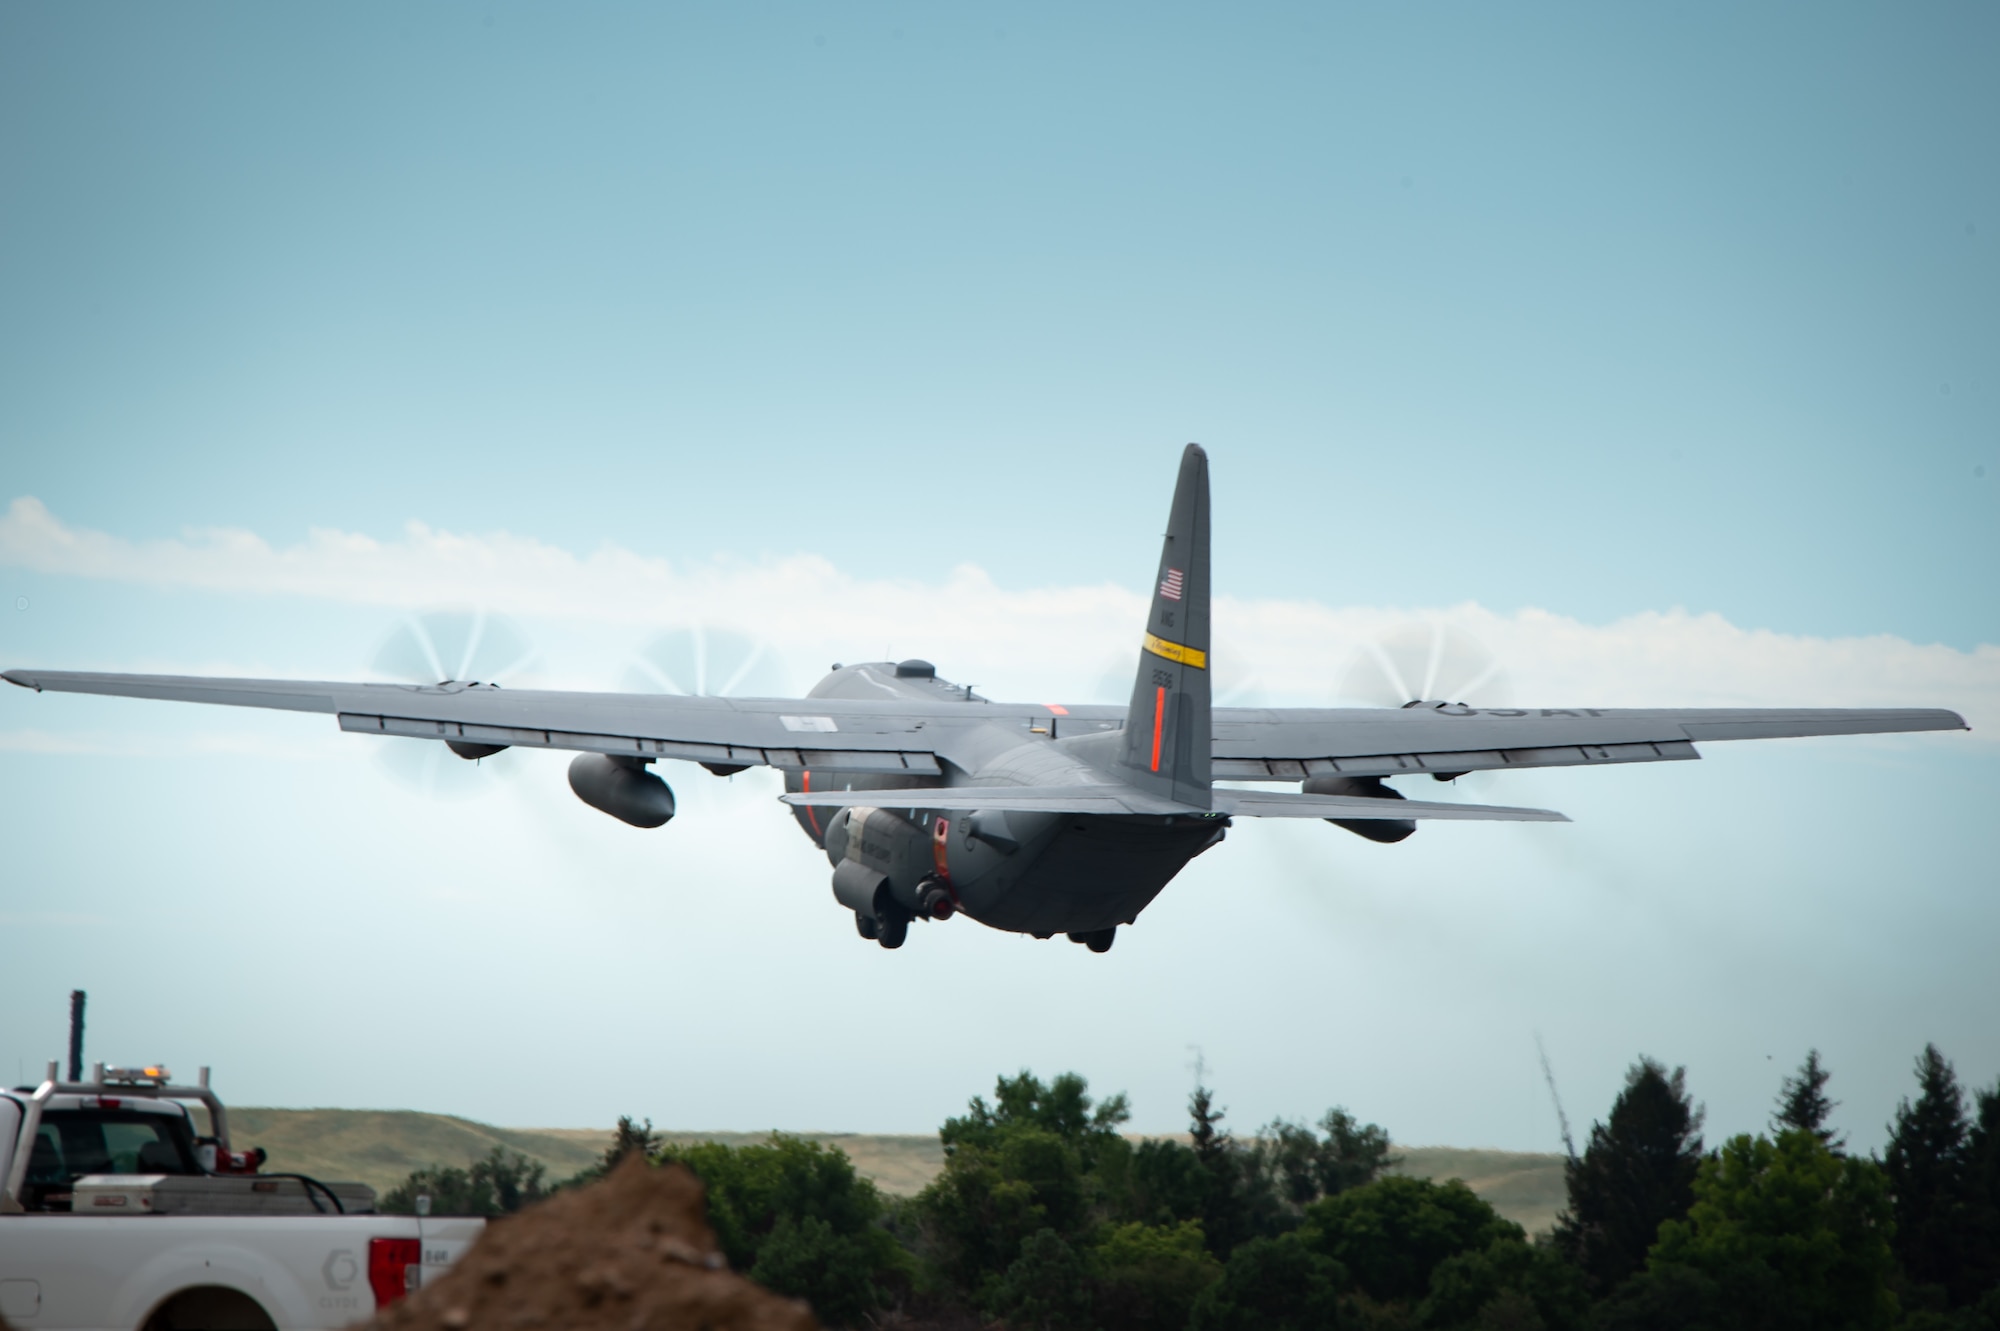 A C-130 Hercules aircraft belonging to the 153rd Airlift Wing, Wyoming Air National Guard, and equipped with a U.S. Forest Service Modular Airborne Fire Fighting System, departs Cheyenne, Wyo., Aug. 3, 2023. The Wyoming Air National Guard MAFFS unit is supporting efforts to fight wildfires in southern Oregon.